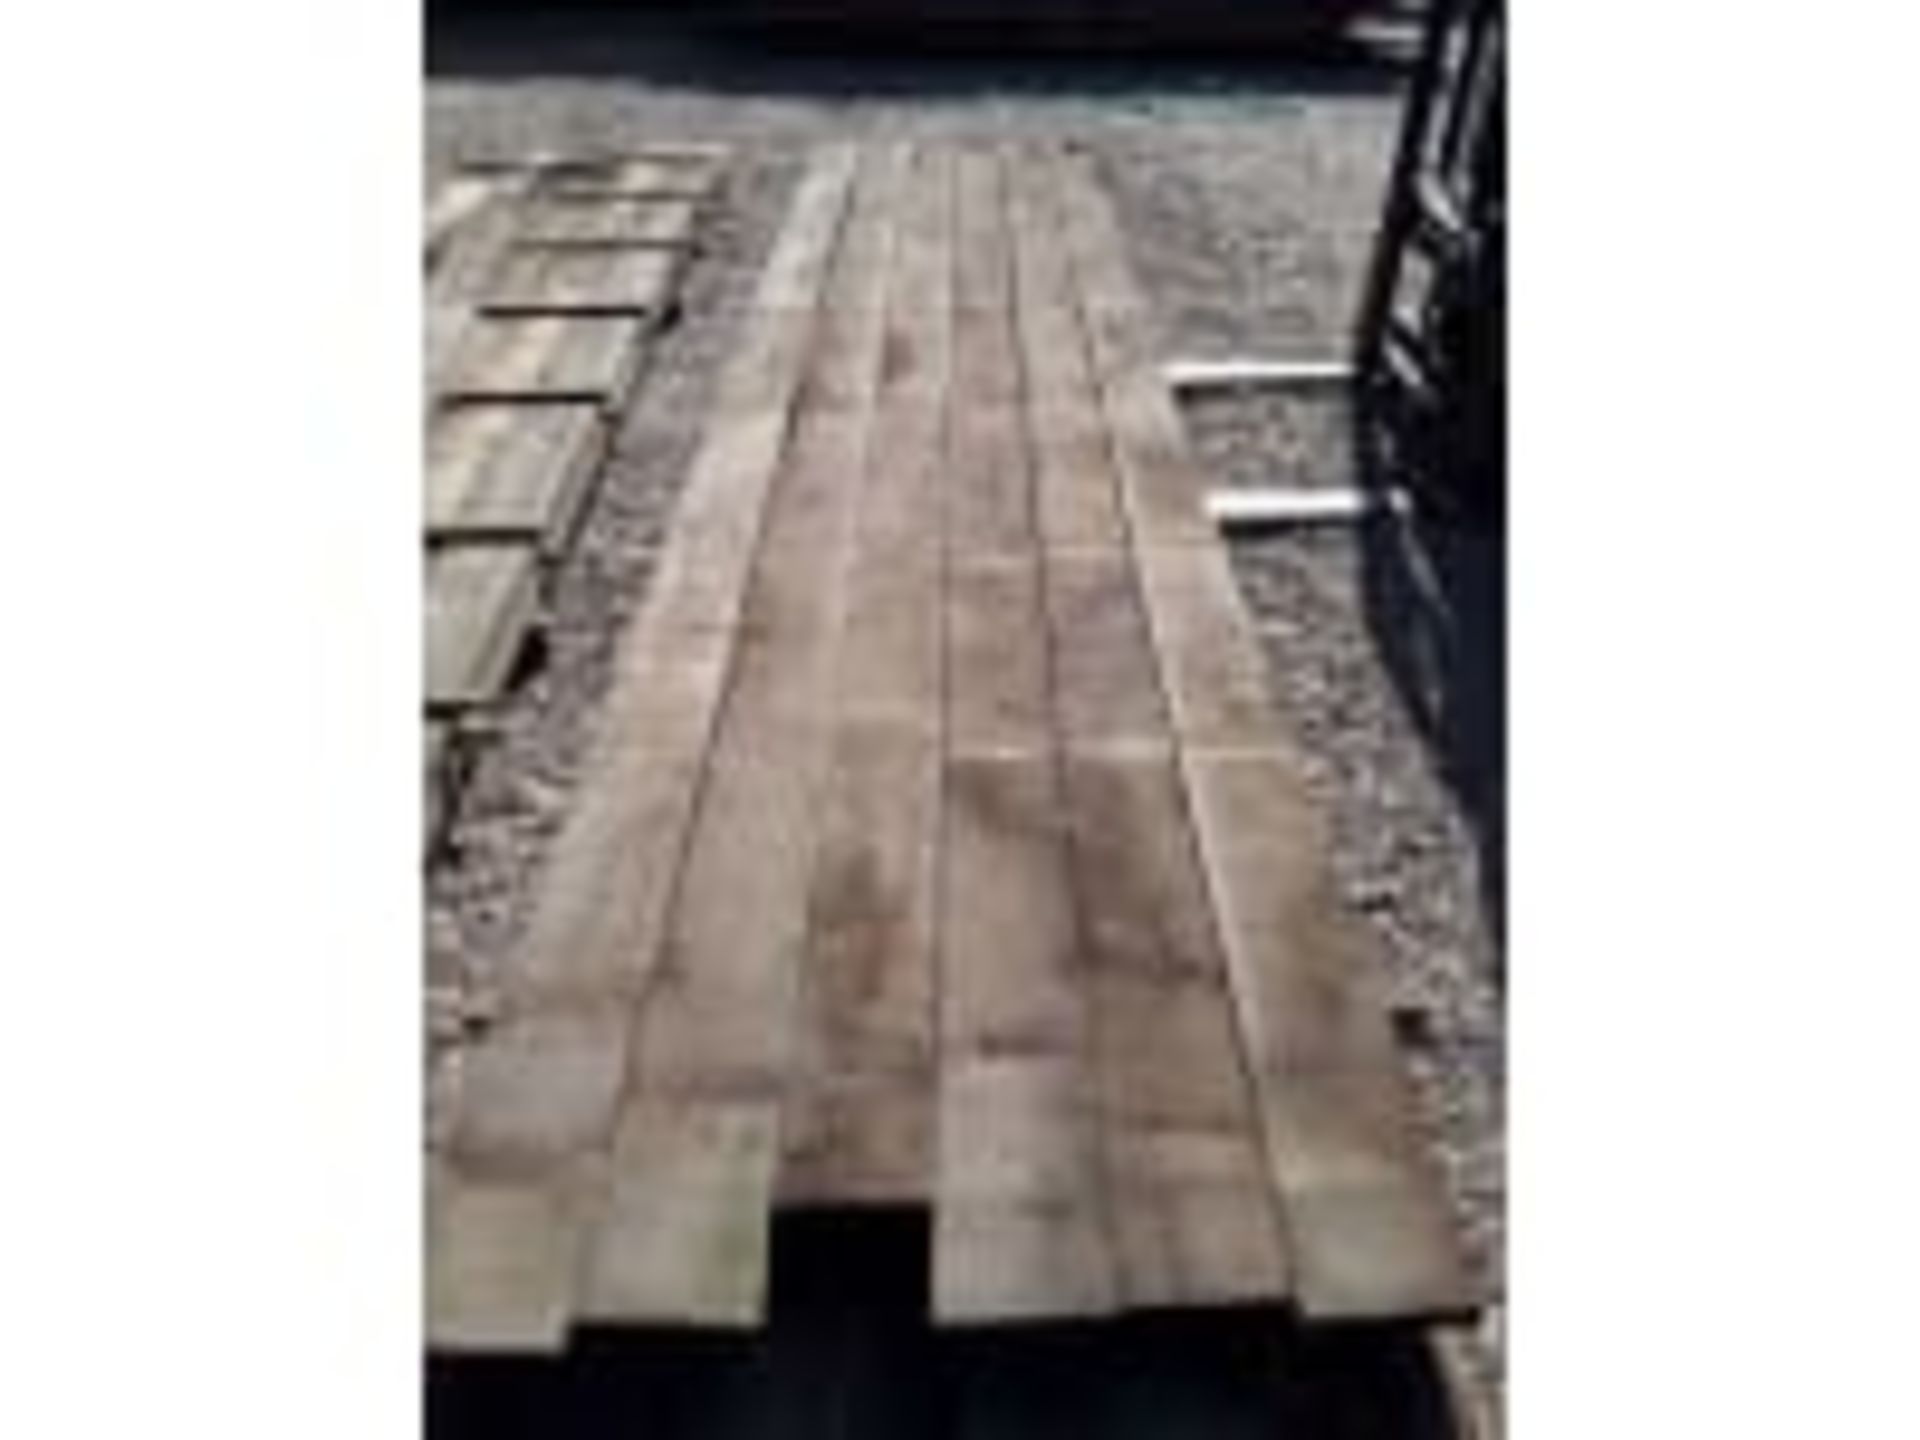 18 x Hardwood Air Dried Sawn Timber English Oak Square Edged Boards / Slabs - Image 8 of 8